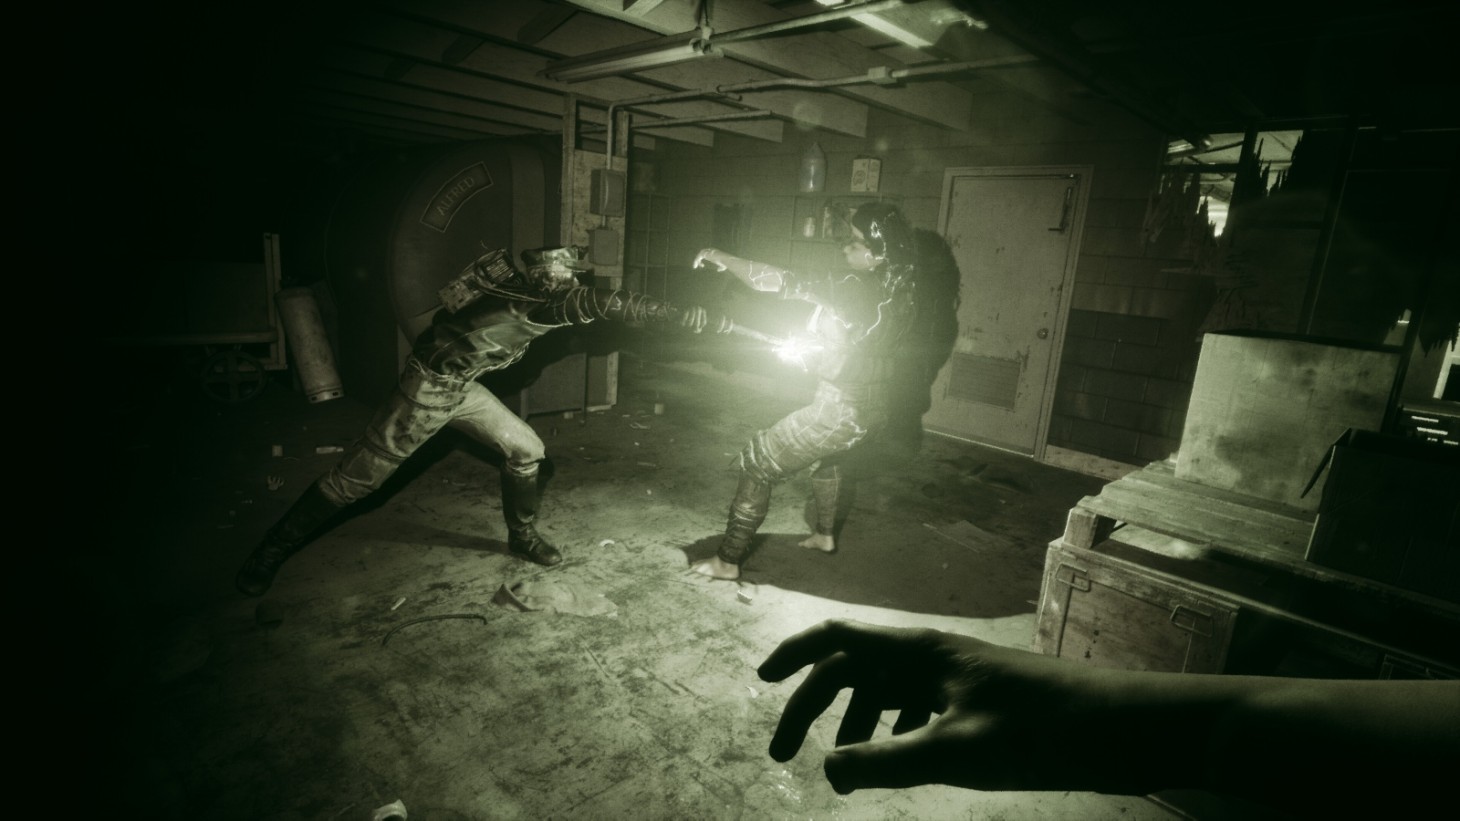 Red Barrels Announces The Outlast Trials Launch Date and Pre-Order Details